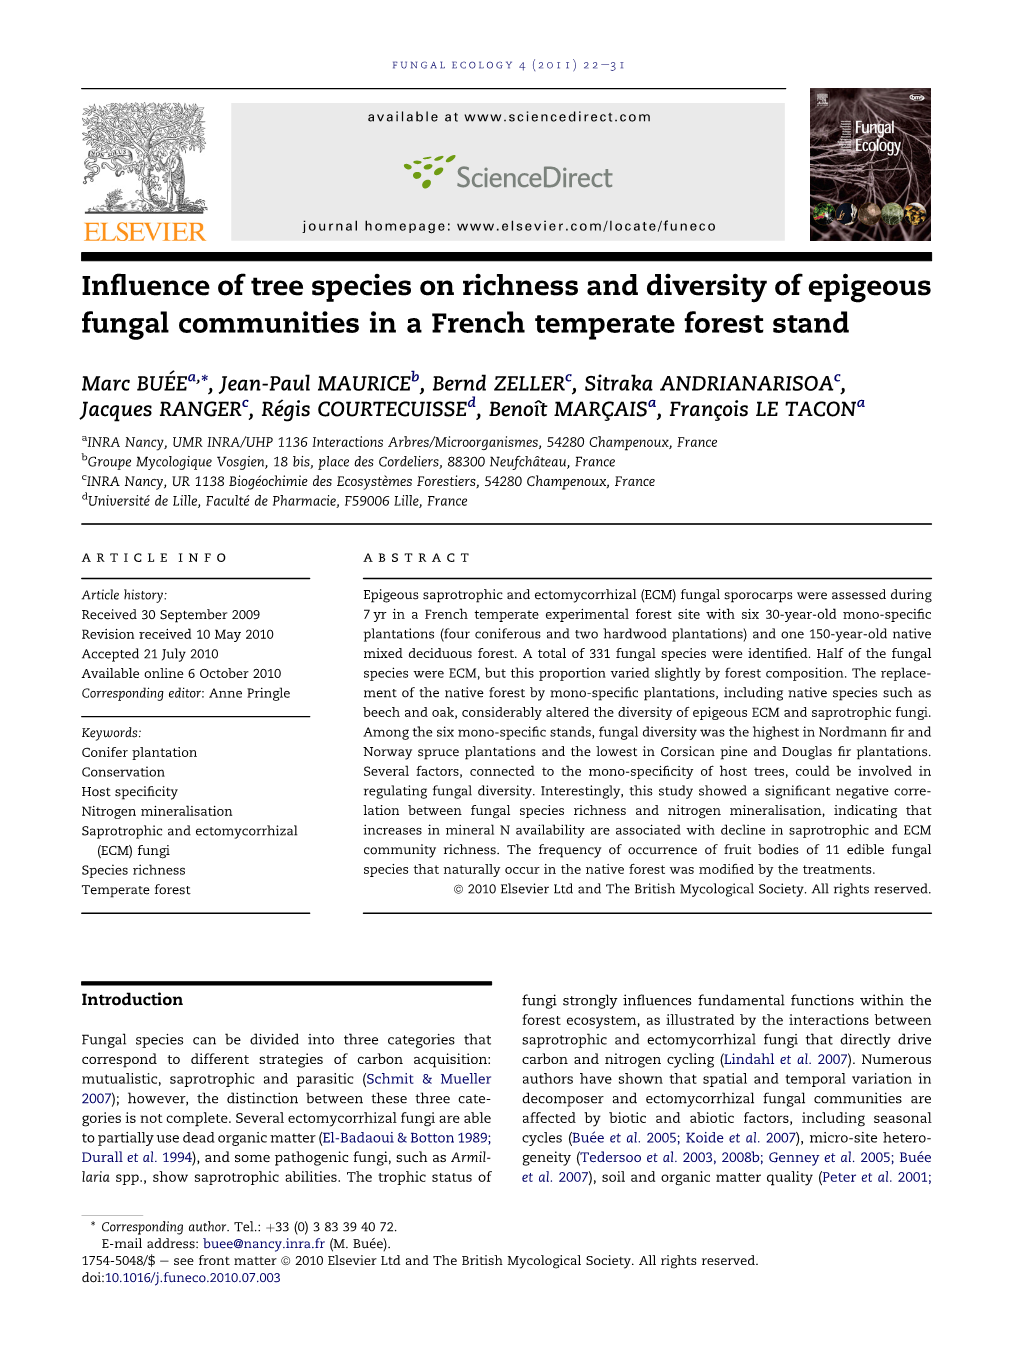 Influence of Tree Species on Richness and Diversity of Epigeous Fungal